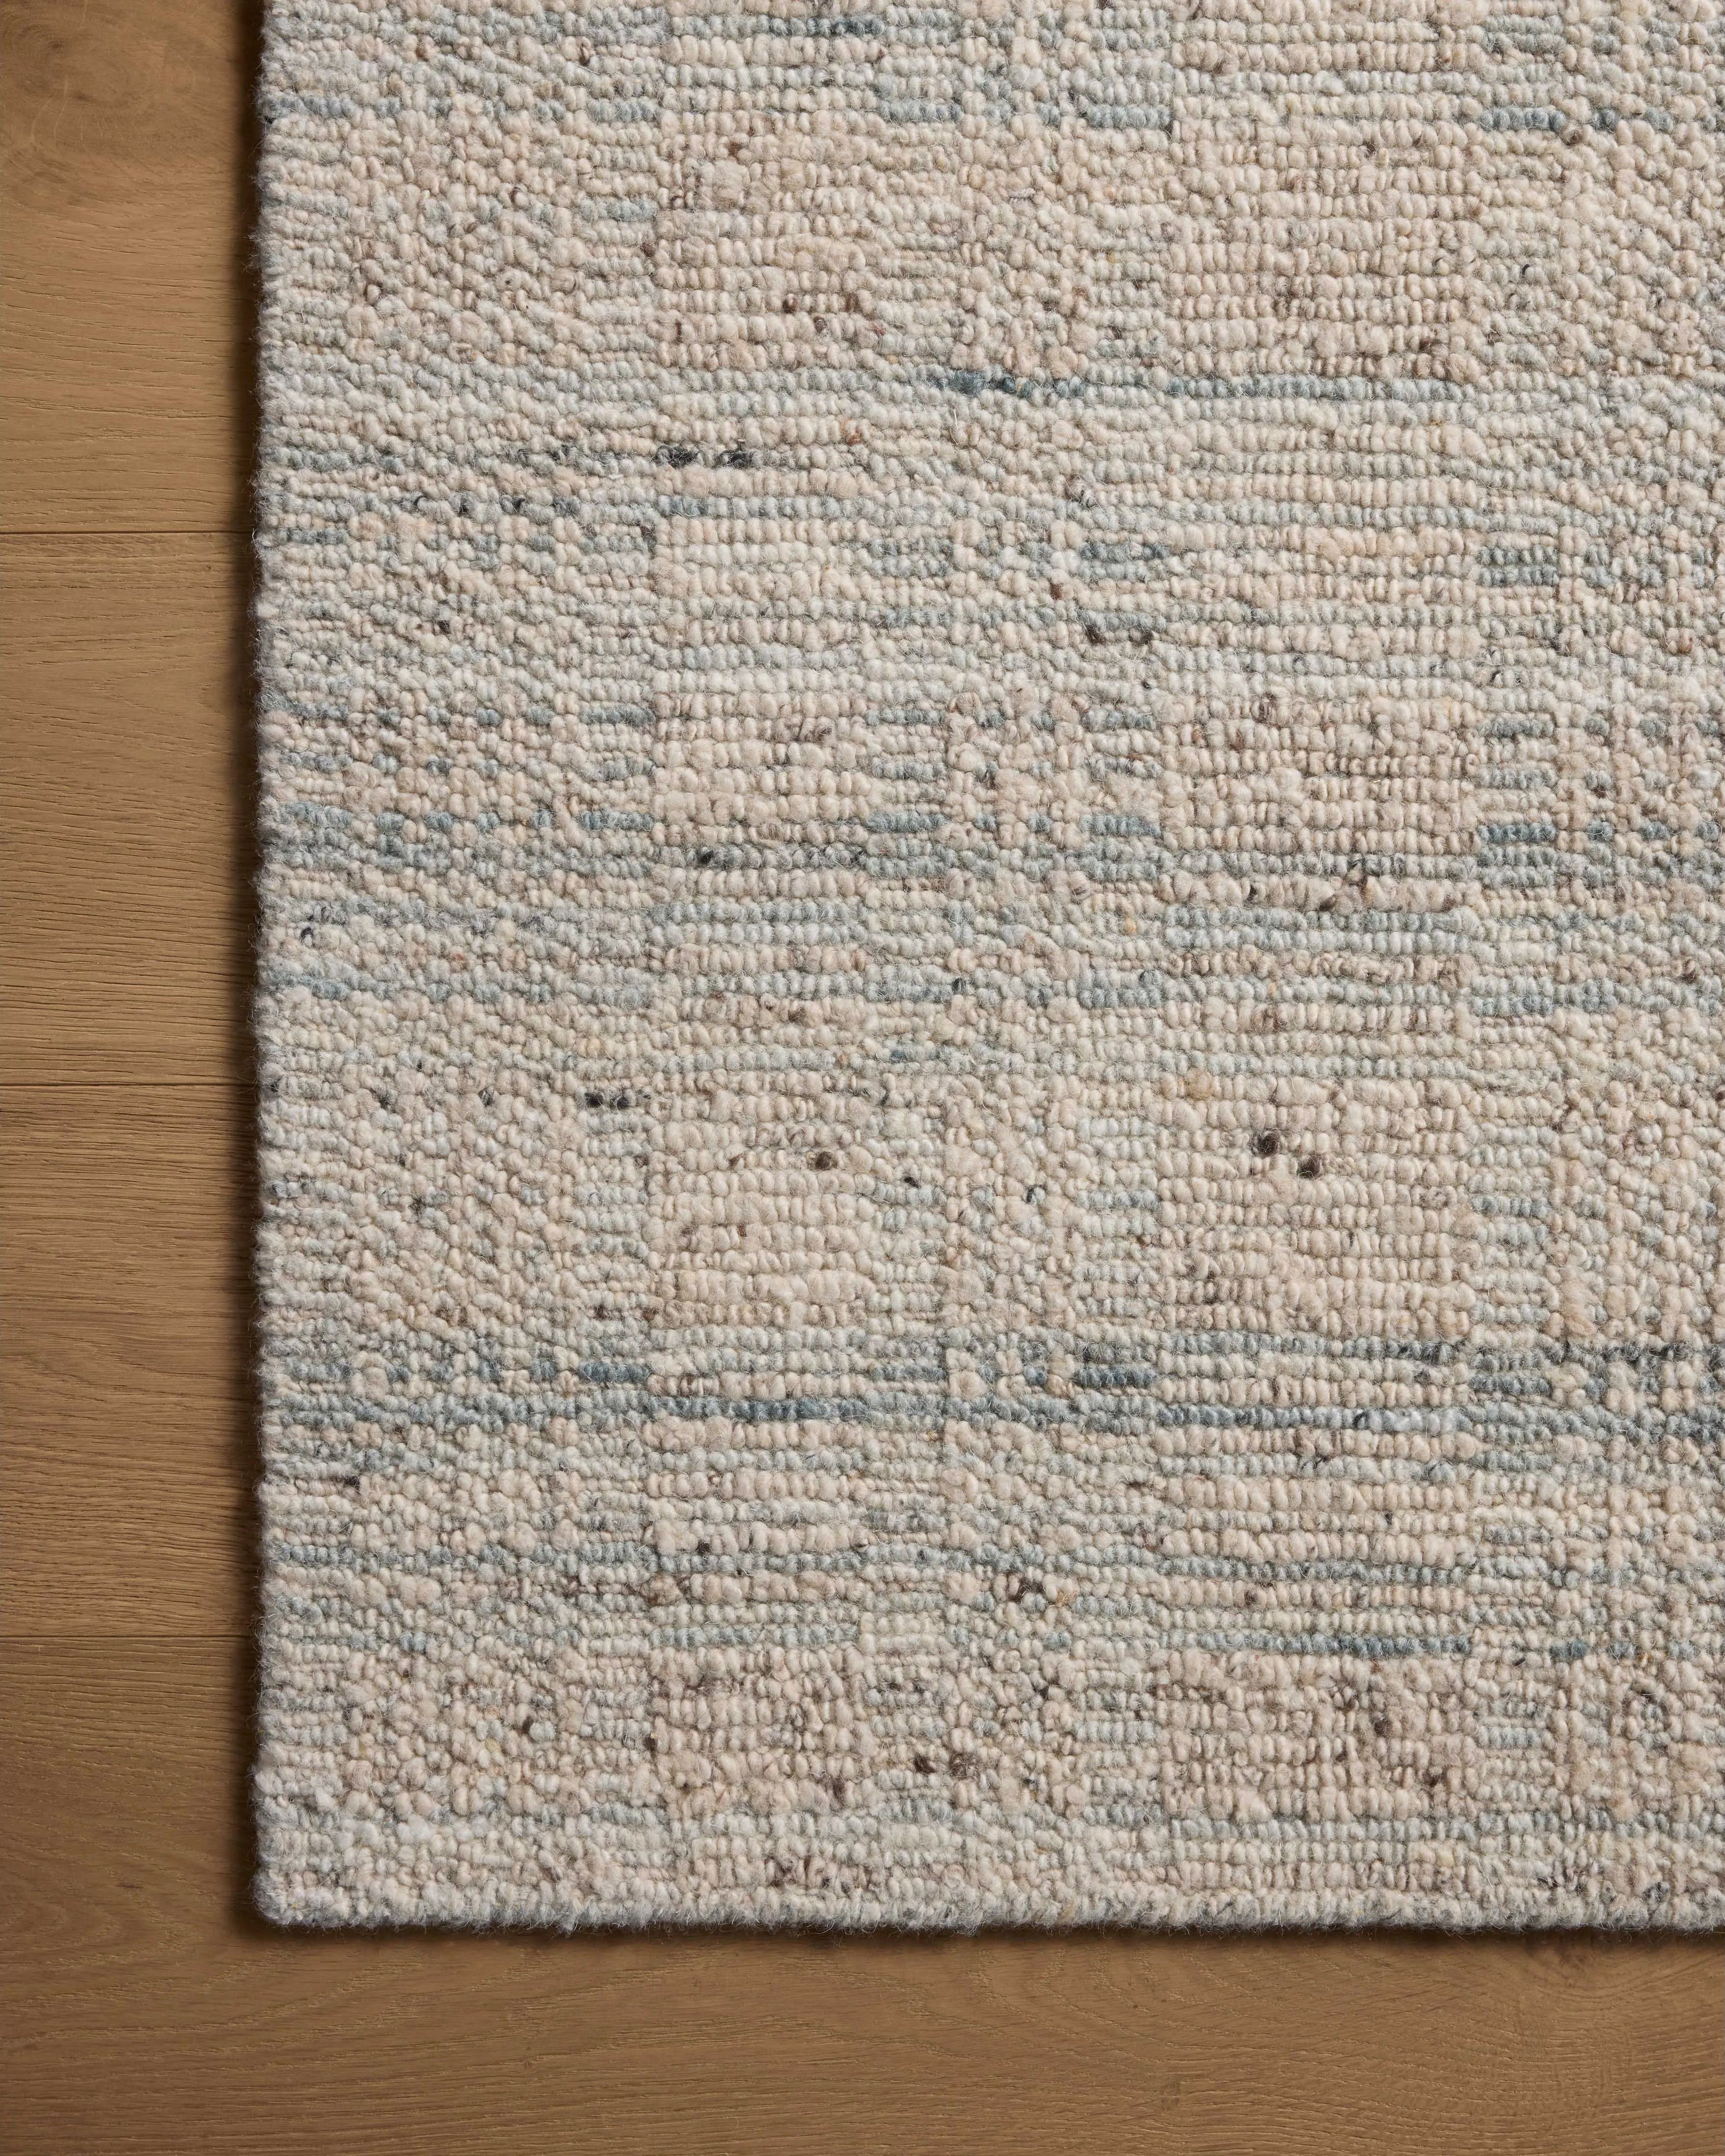 The Sonya Mist / Oatmeal Rug is a hand-loomed area rug with a light, airy palette and understated graphic design. The rug’s textural pile is a soft blend of wool and nylon that creates dimension in living rooms, bedrooms, and more. Amethyst Home provides interior design, new home construction design consulting, vintage area rugs, and lighting in the Charlotte metro area.